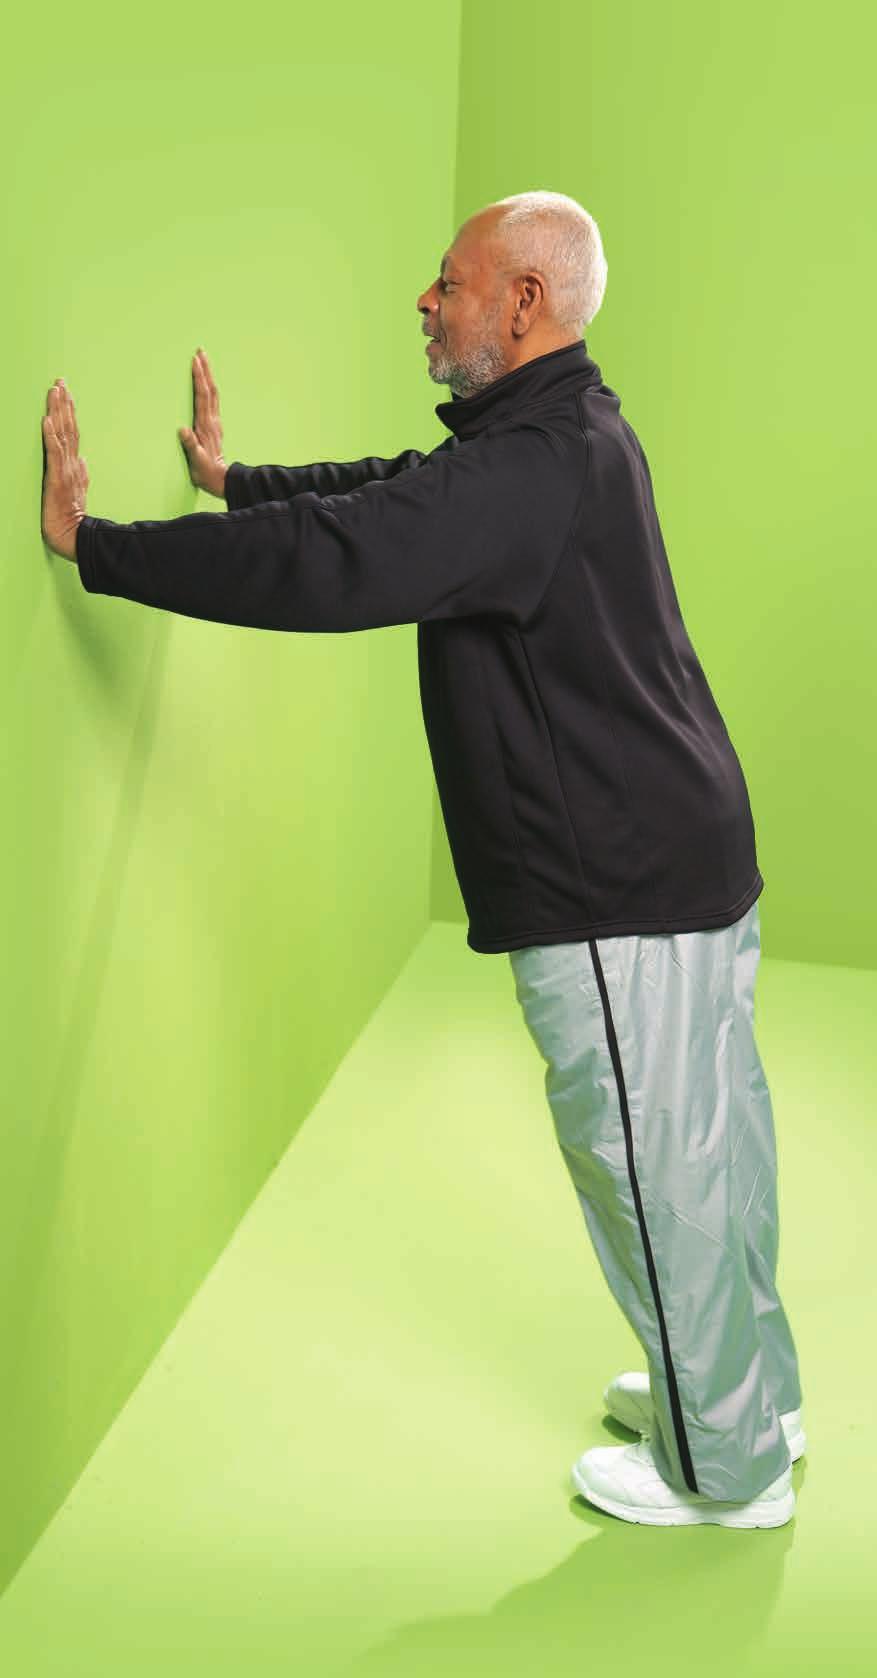 3 Slowly bend your elbows and lower your upper body toward the wall. Keep your feet flat on the floor.